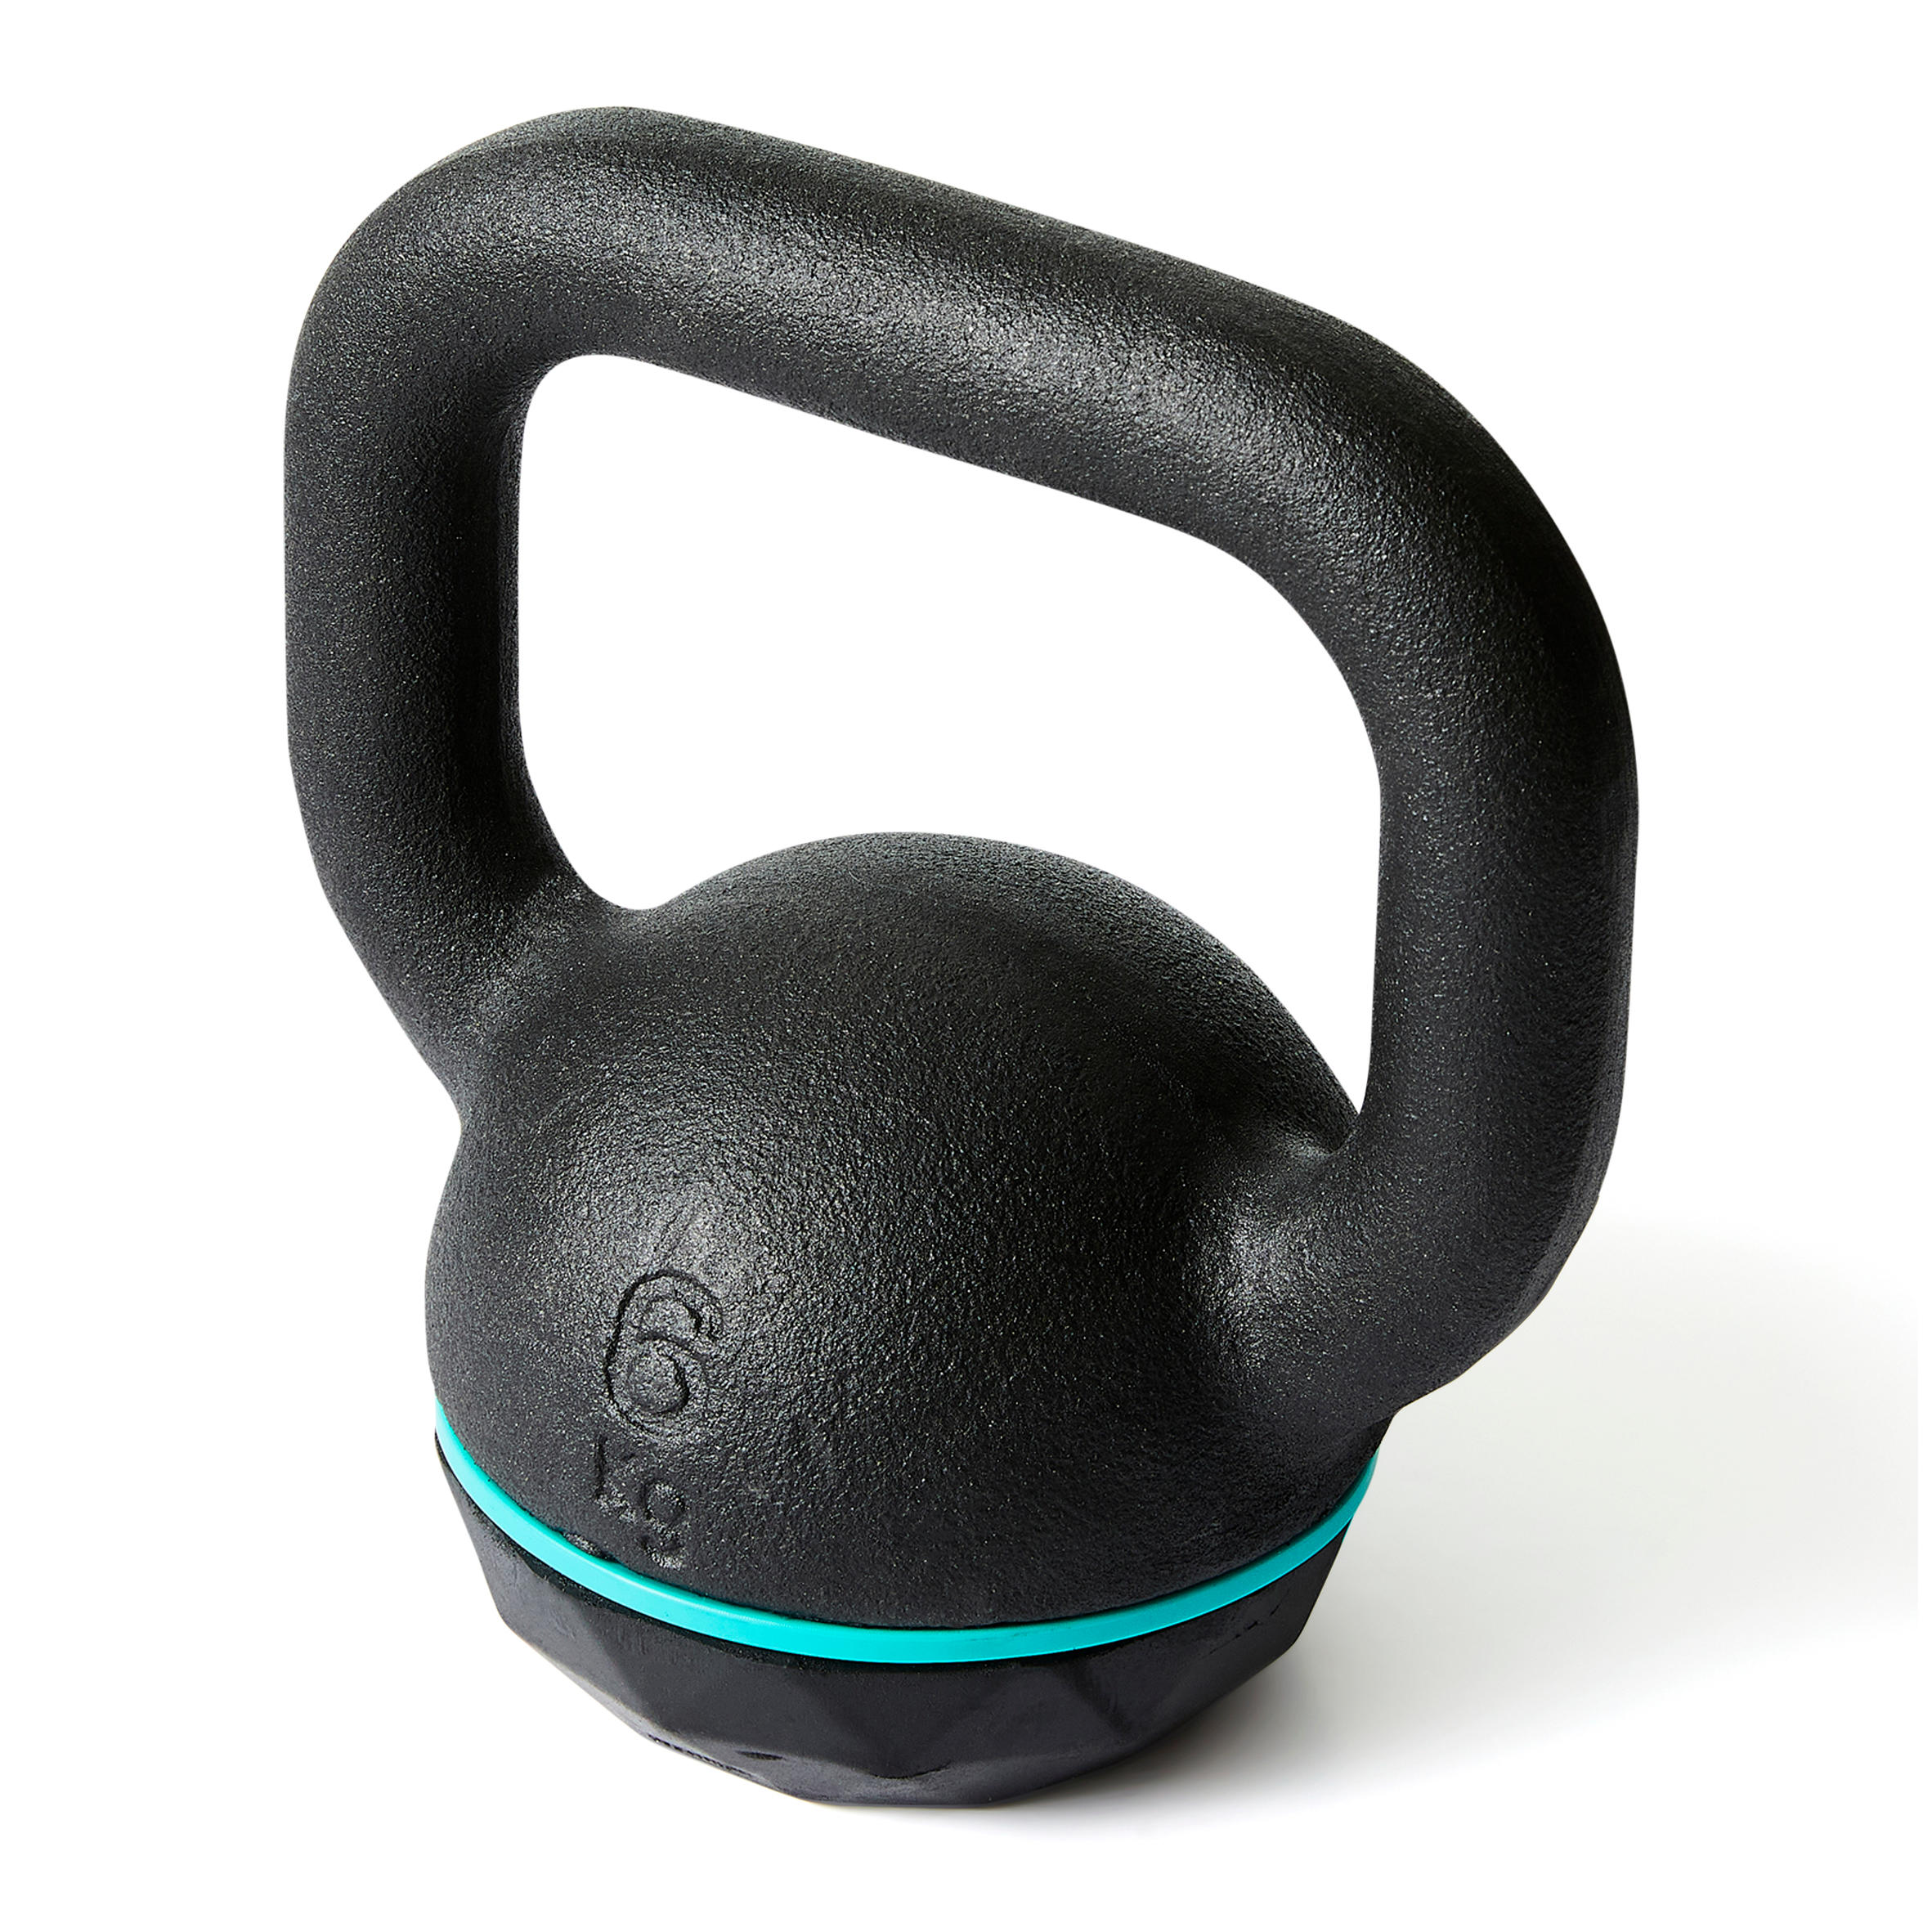 6 kg Cast-Iron Kettlebell with Rubber Base - CORENGTH